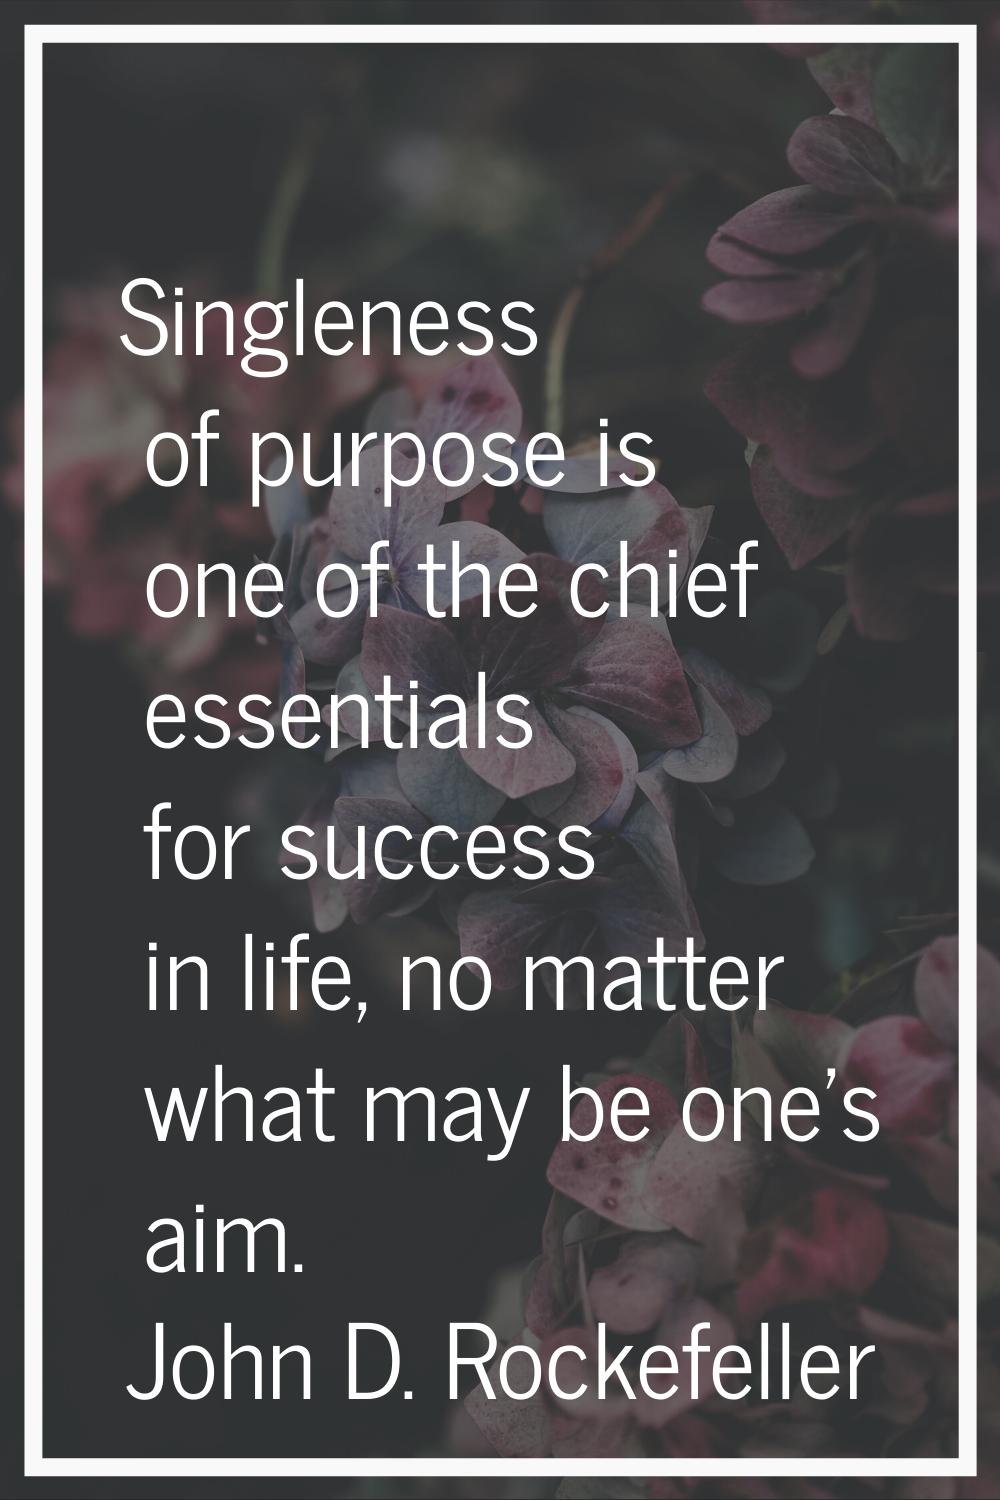 Singleness of purpose is one of the chief essentials for success in life, no matter what may be one